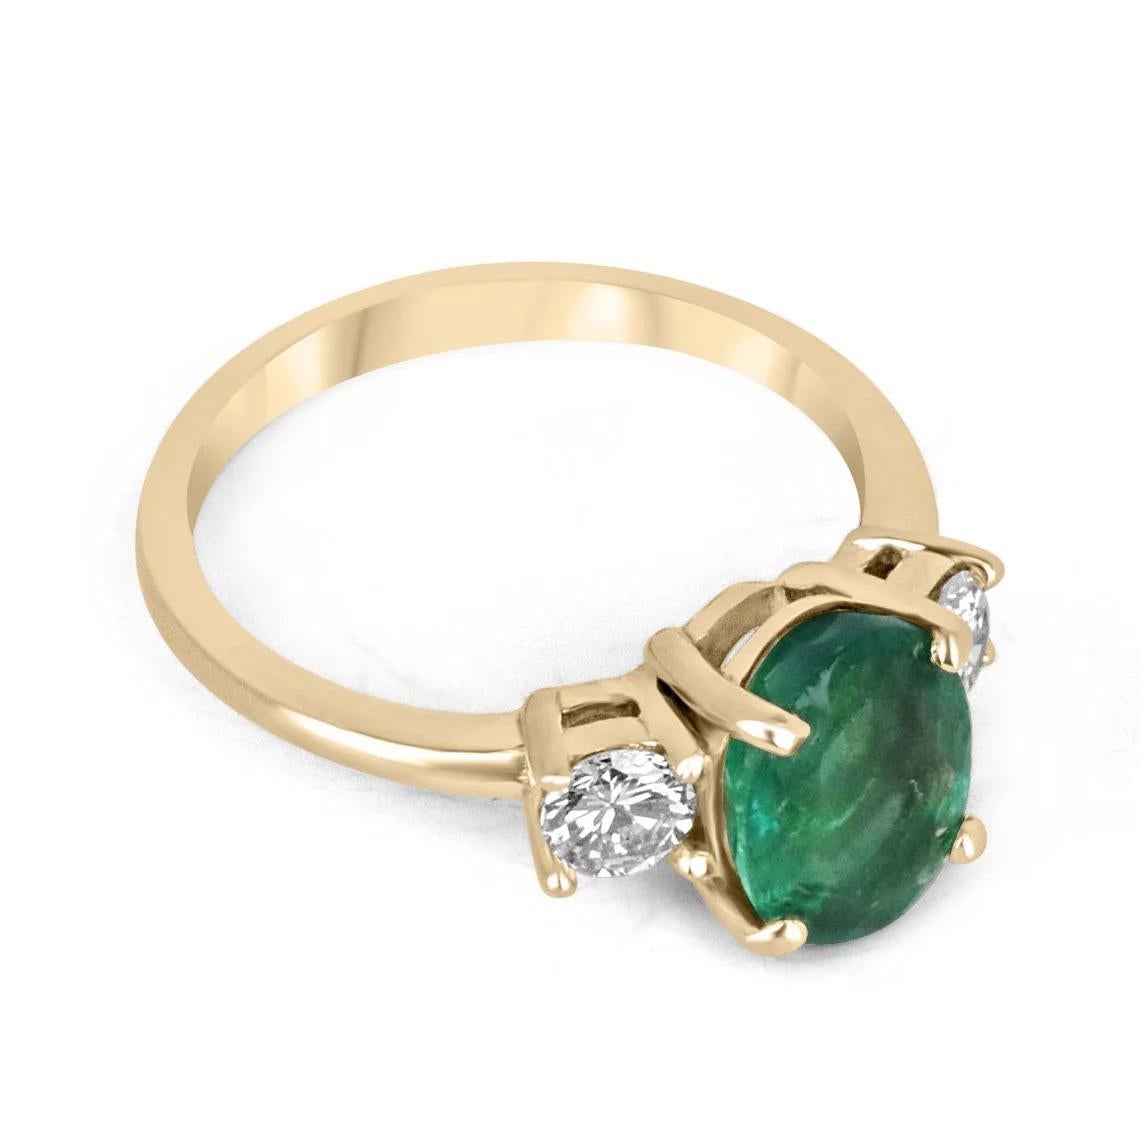 This emerald three-stone ring features a striking 2.10-carat oval-cut emerald as the centerpiece, boasting a captivating dark and lush green color. The emerald is beautifully complemented by brilliant round-cut diamonds, which delicately accentuate